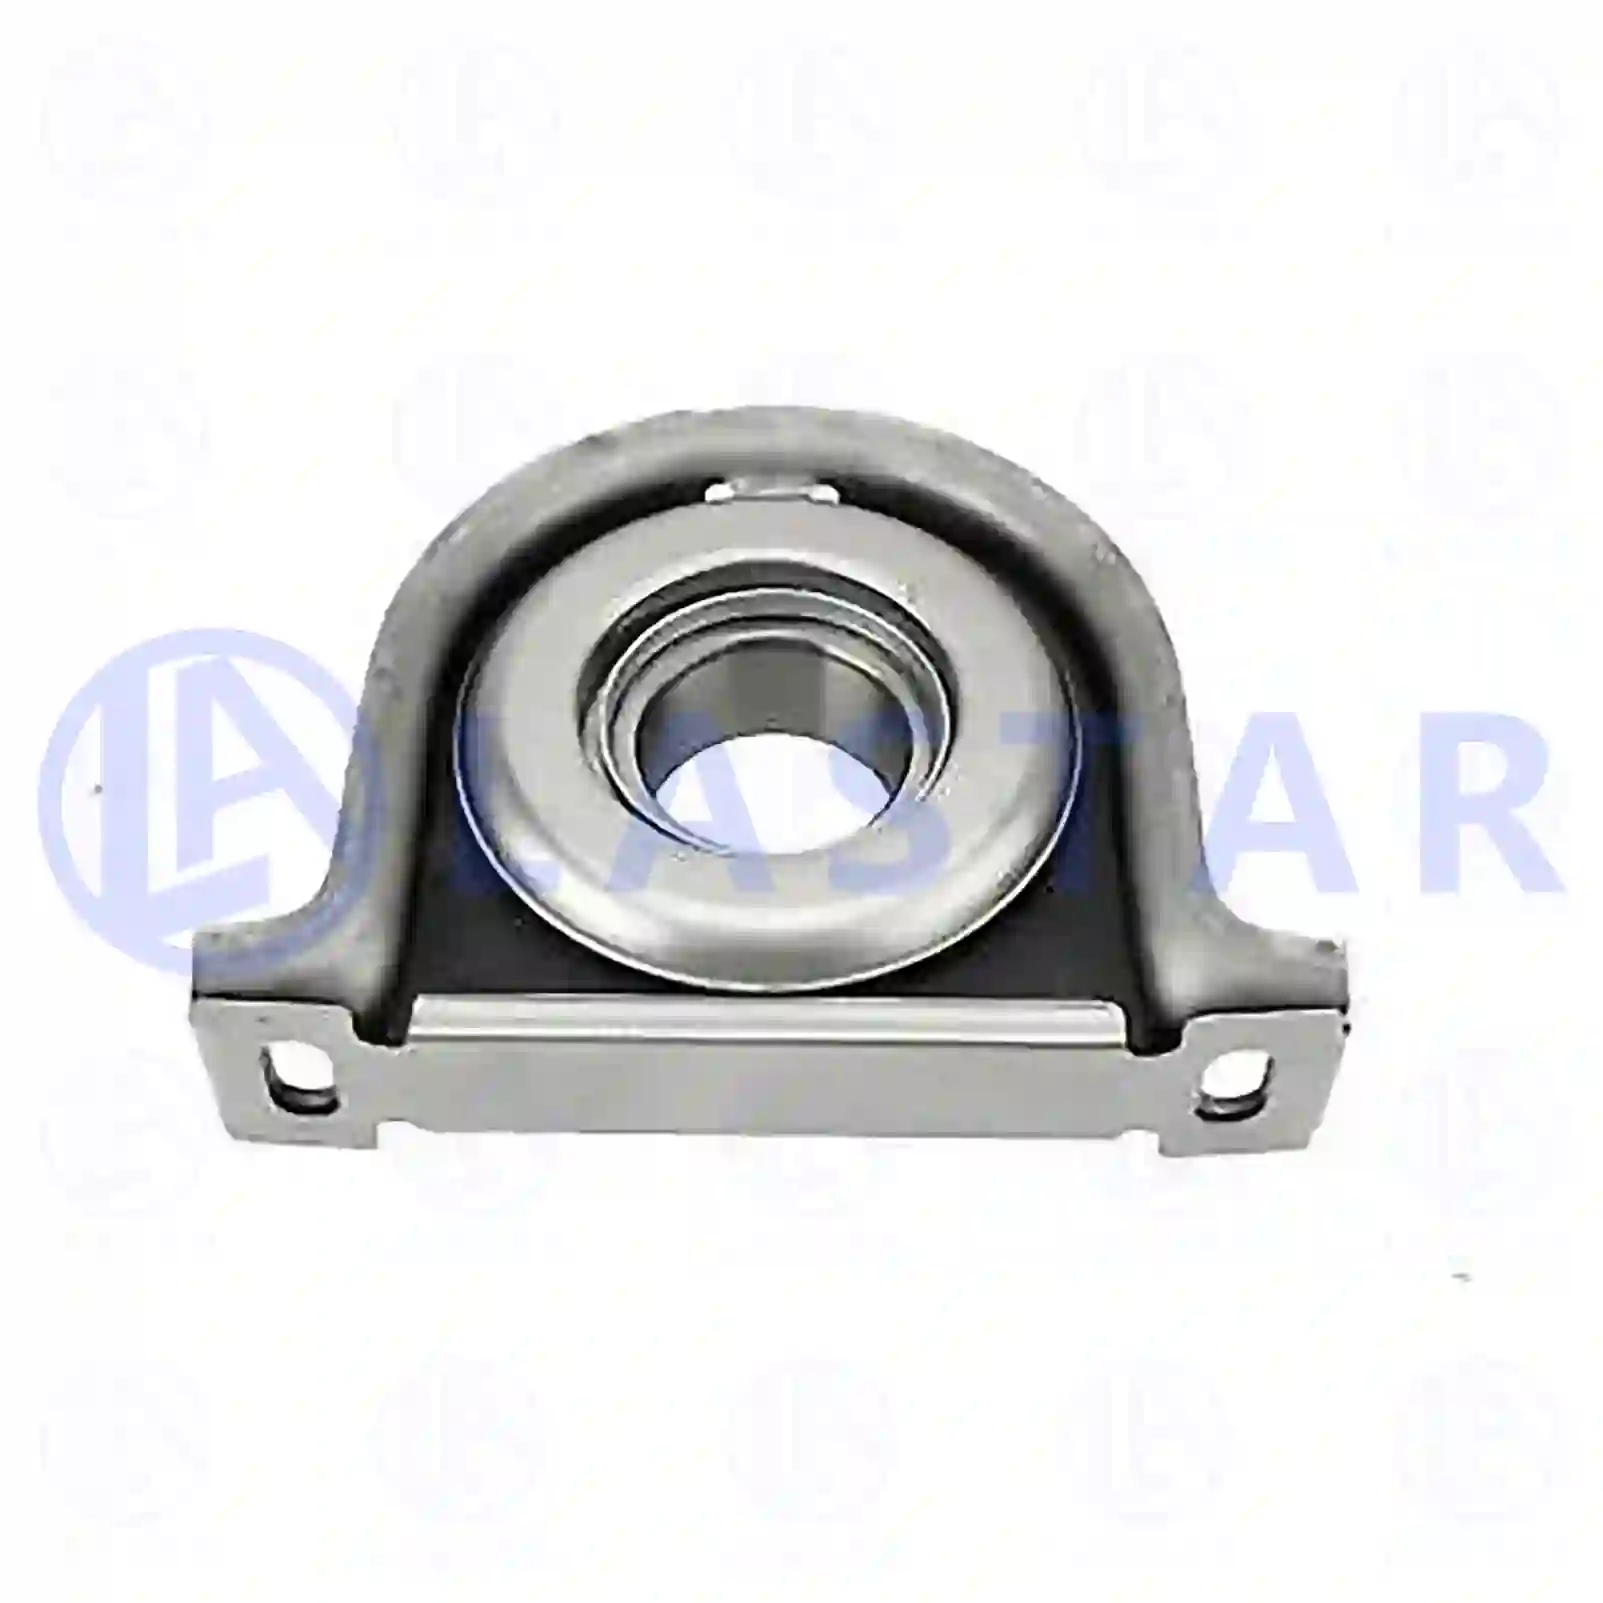 Support Bearing Center bearing, la no: 77734323 ,  oem no:3397101 Lastar Spare Part | Truck Spare Parts, Auotomotive Spare Parts